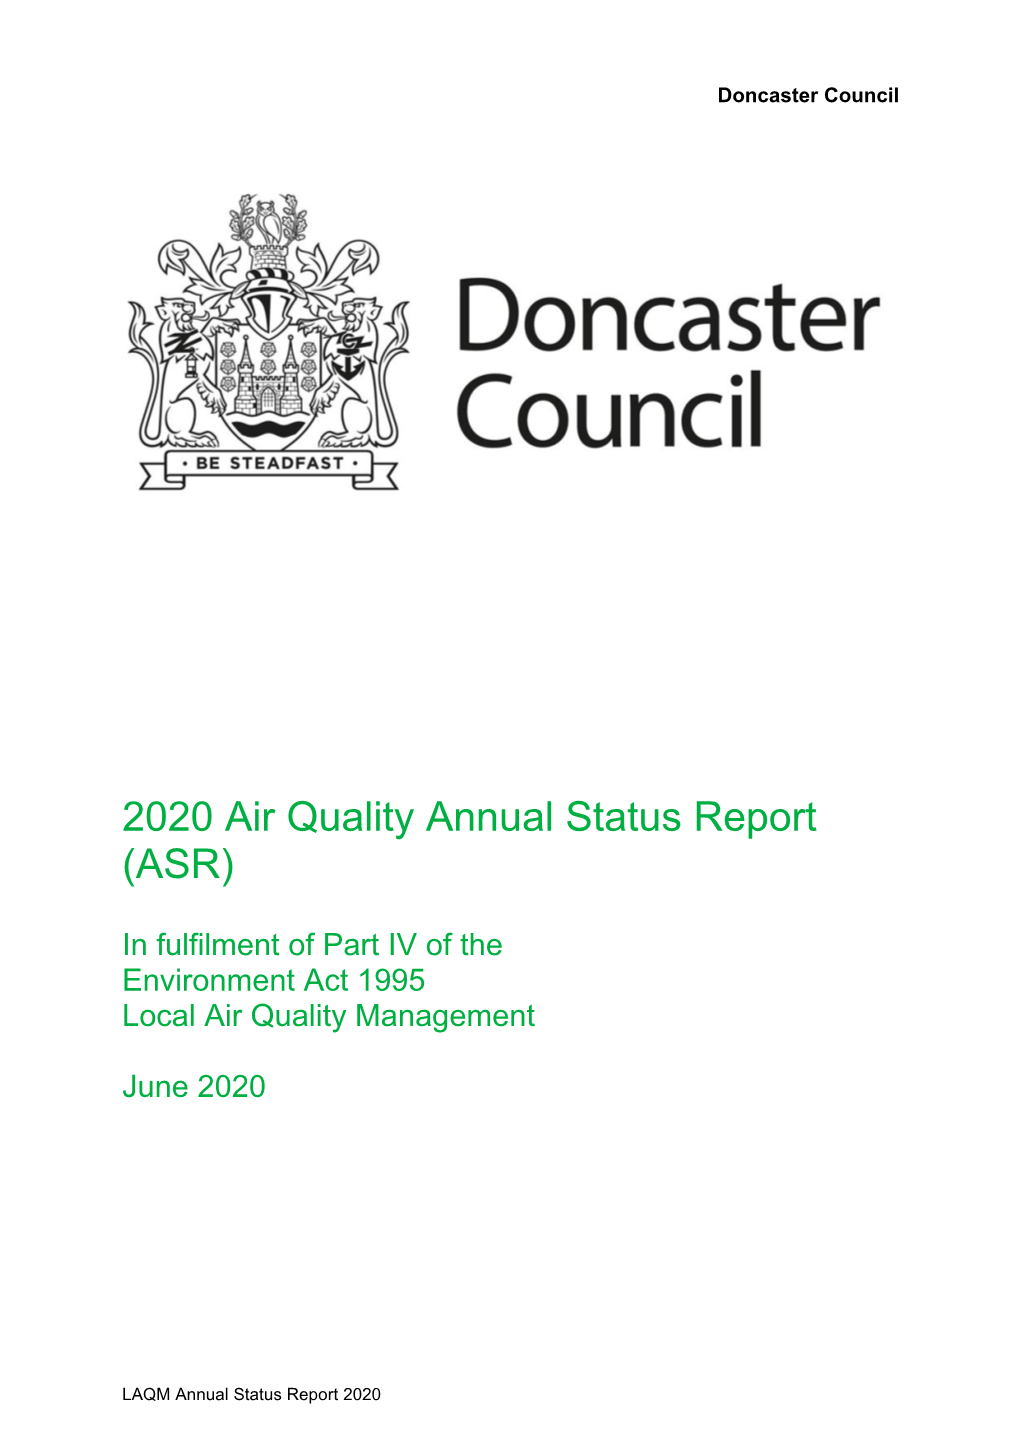 Doncaster Council's Annual Status Report 2020